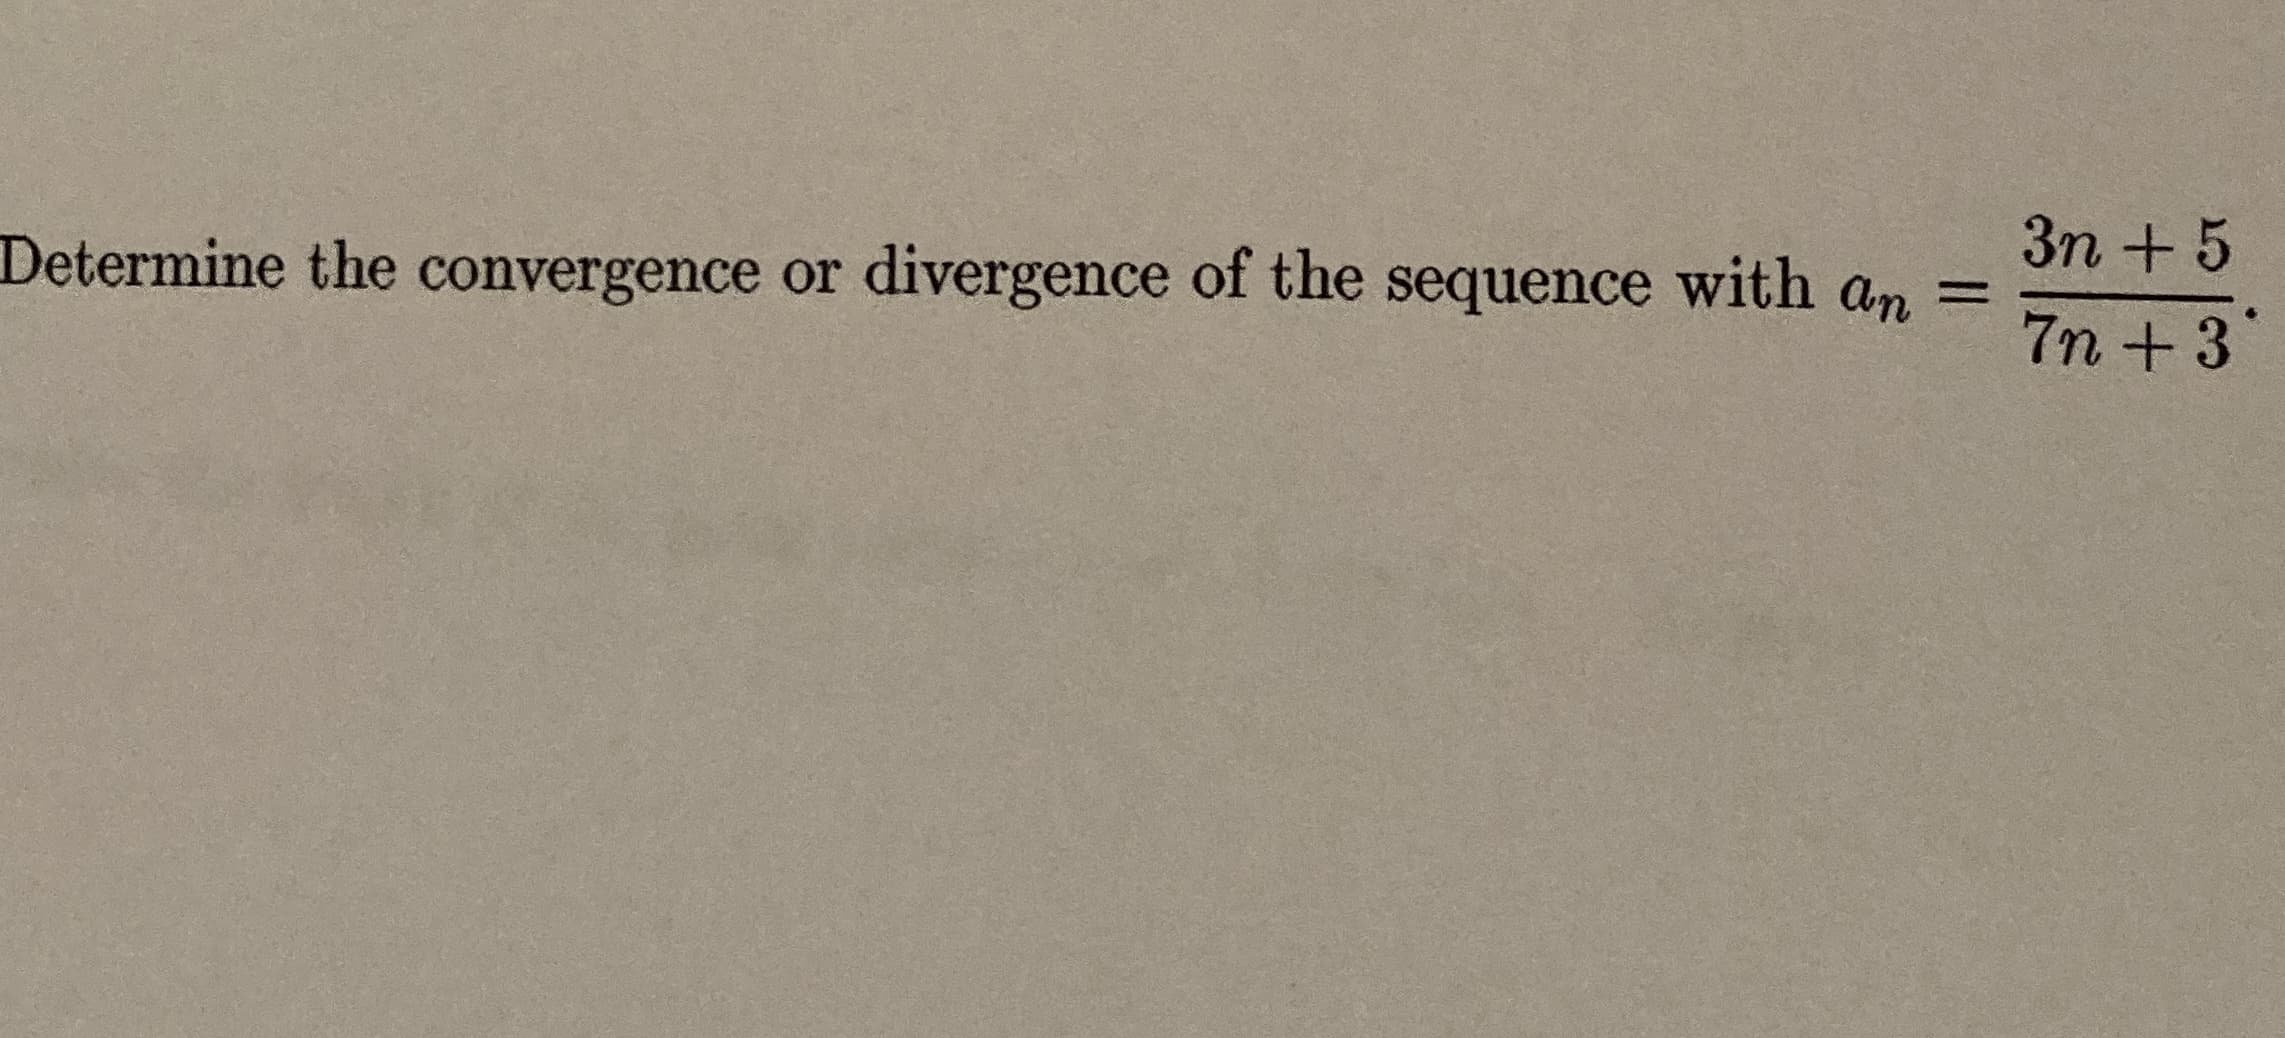 3n + 5
%3D
7n +3
Determine the convergence or
divergence of the sequence with an
%3D
